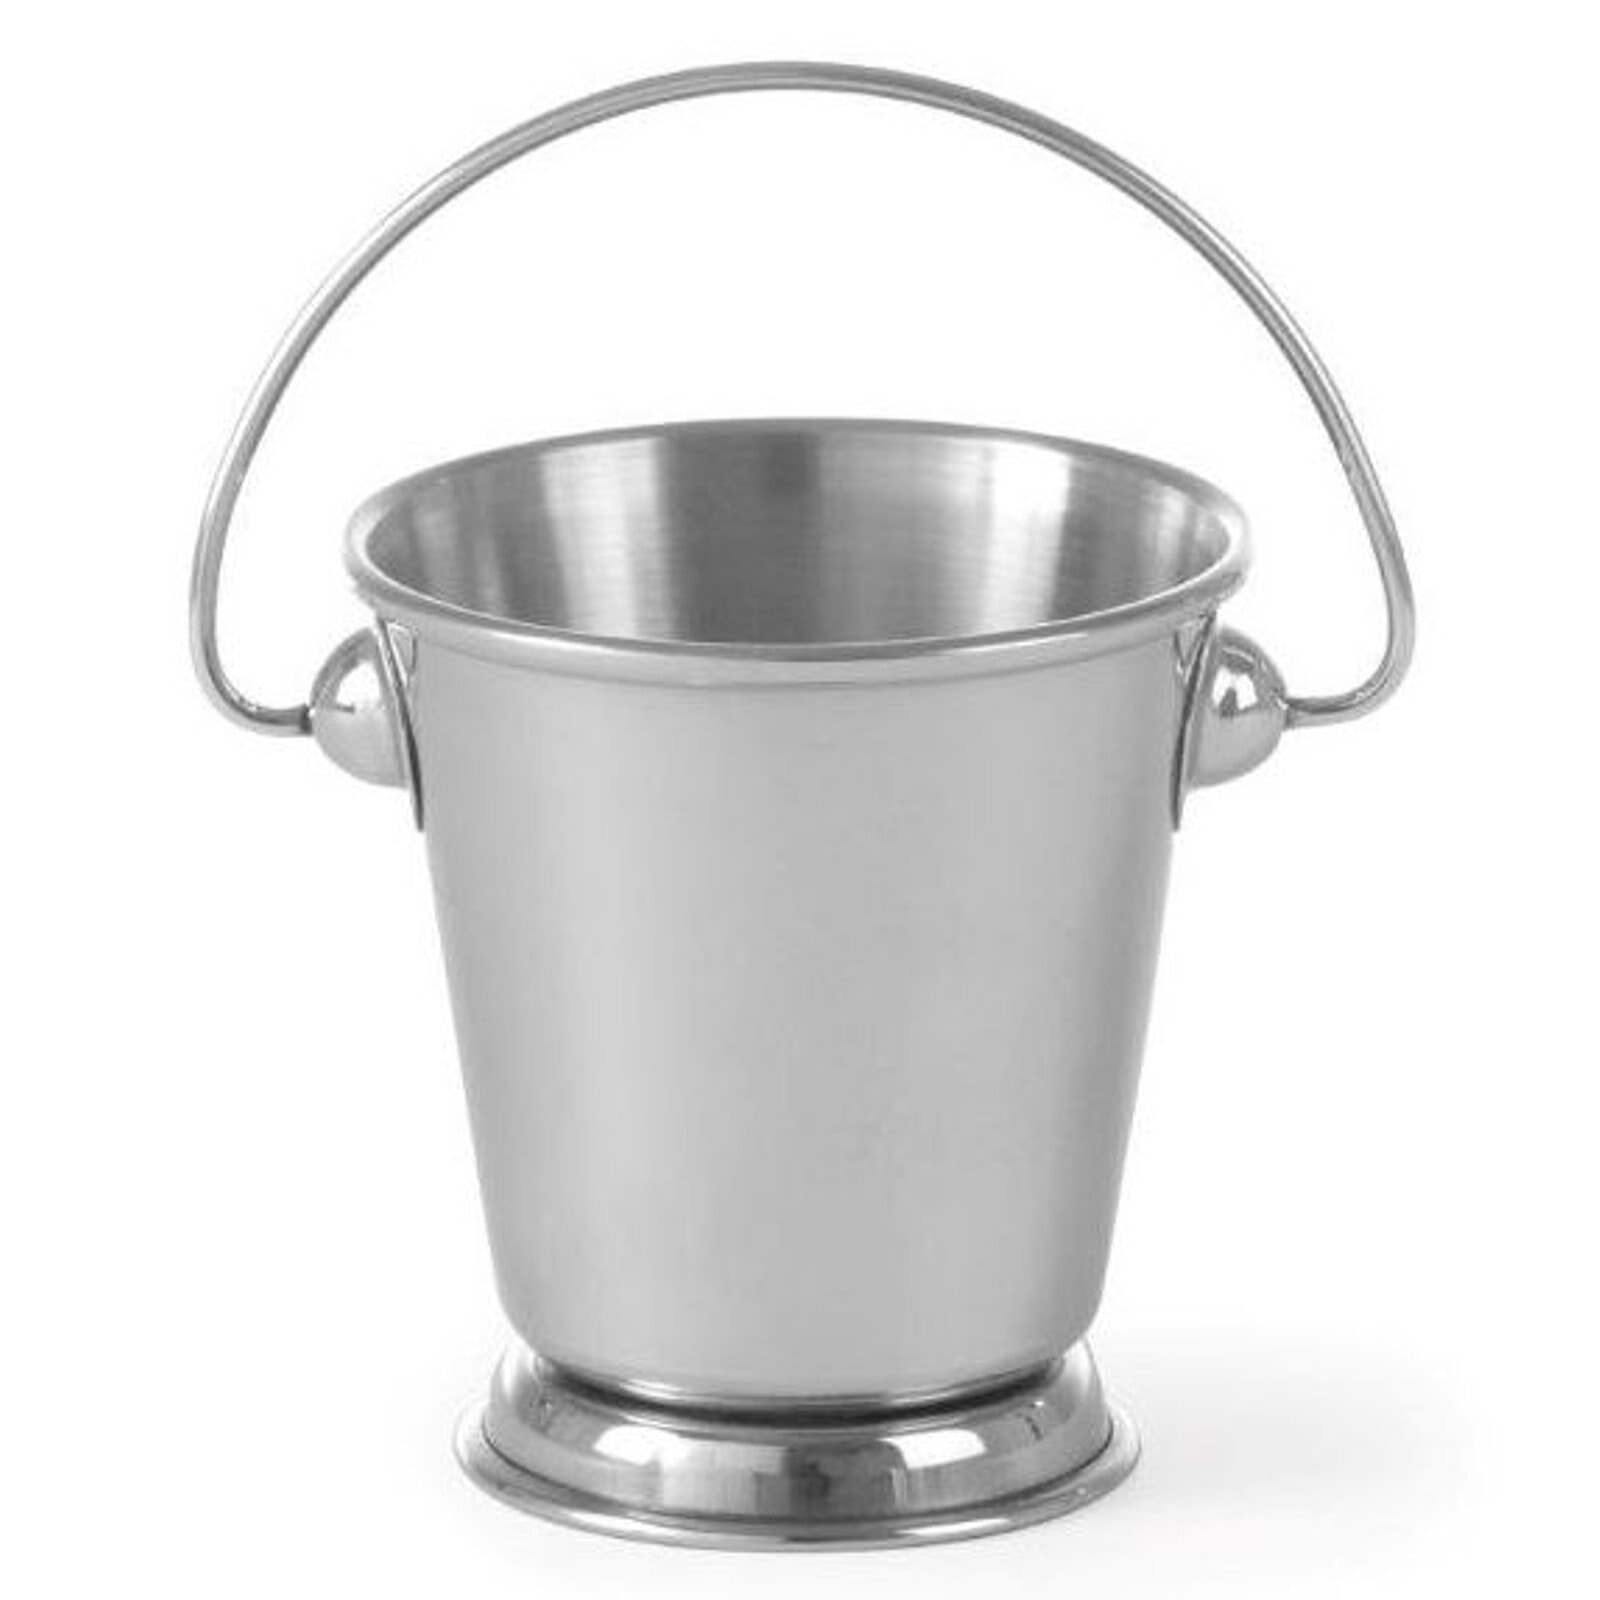 Miniature bucket with a snack holder made of stainless steel dia. 125mm - Hendi 426371